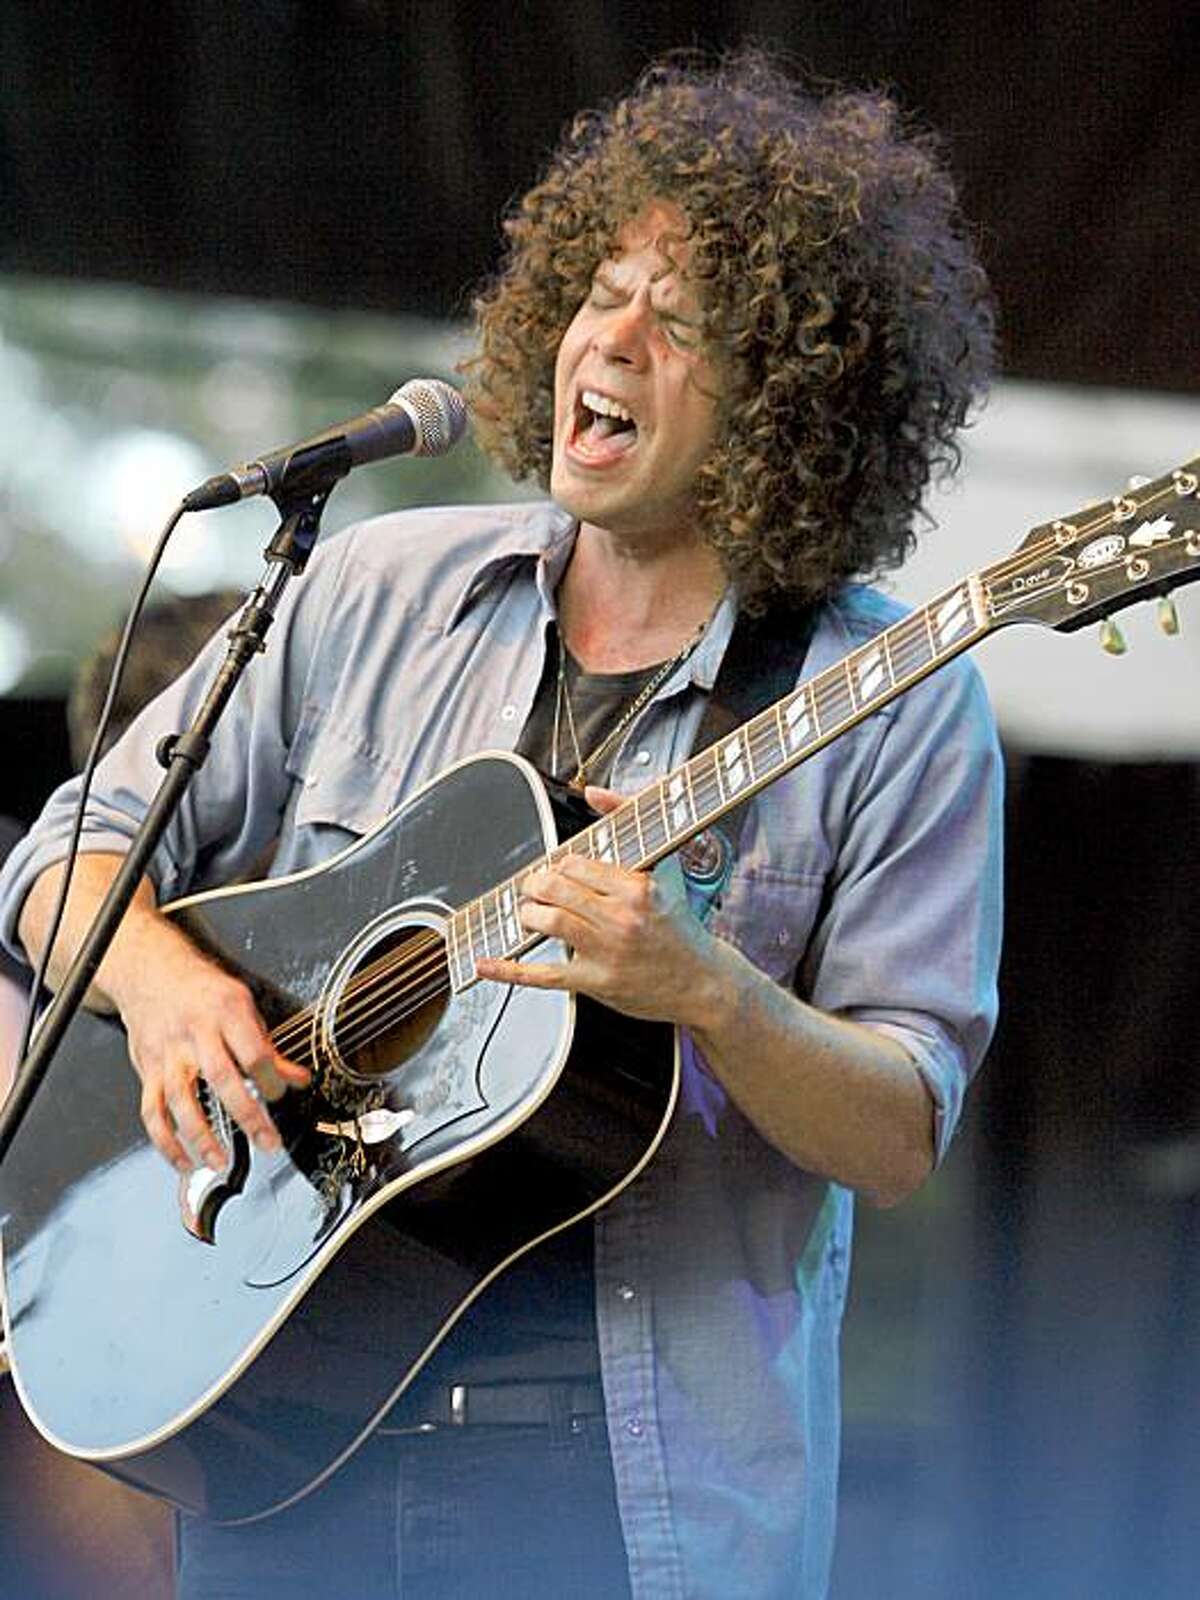 Lead singer for the band Wolfmother at the Bridge School Concert at the Shoreline Amphitheatre in Mountain View, California.